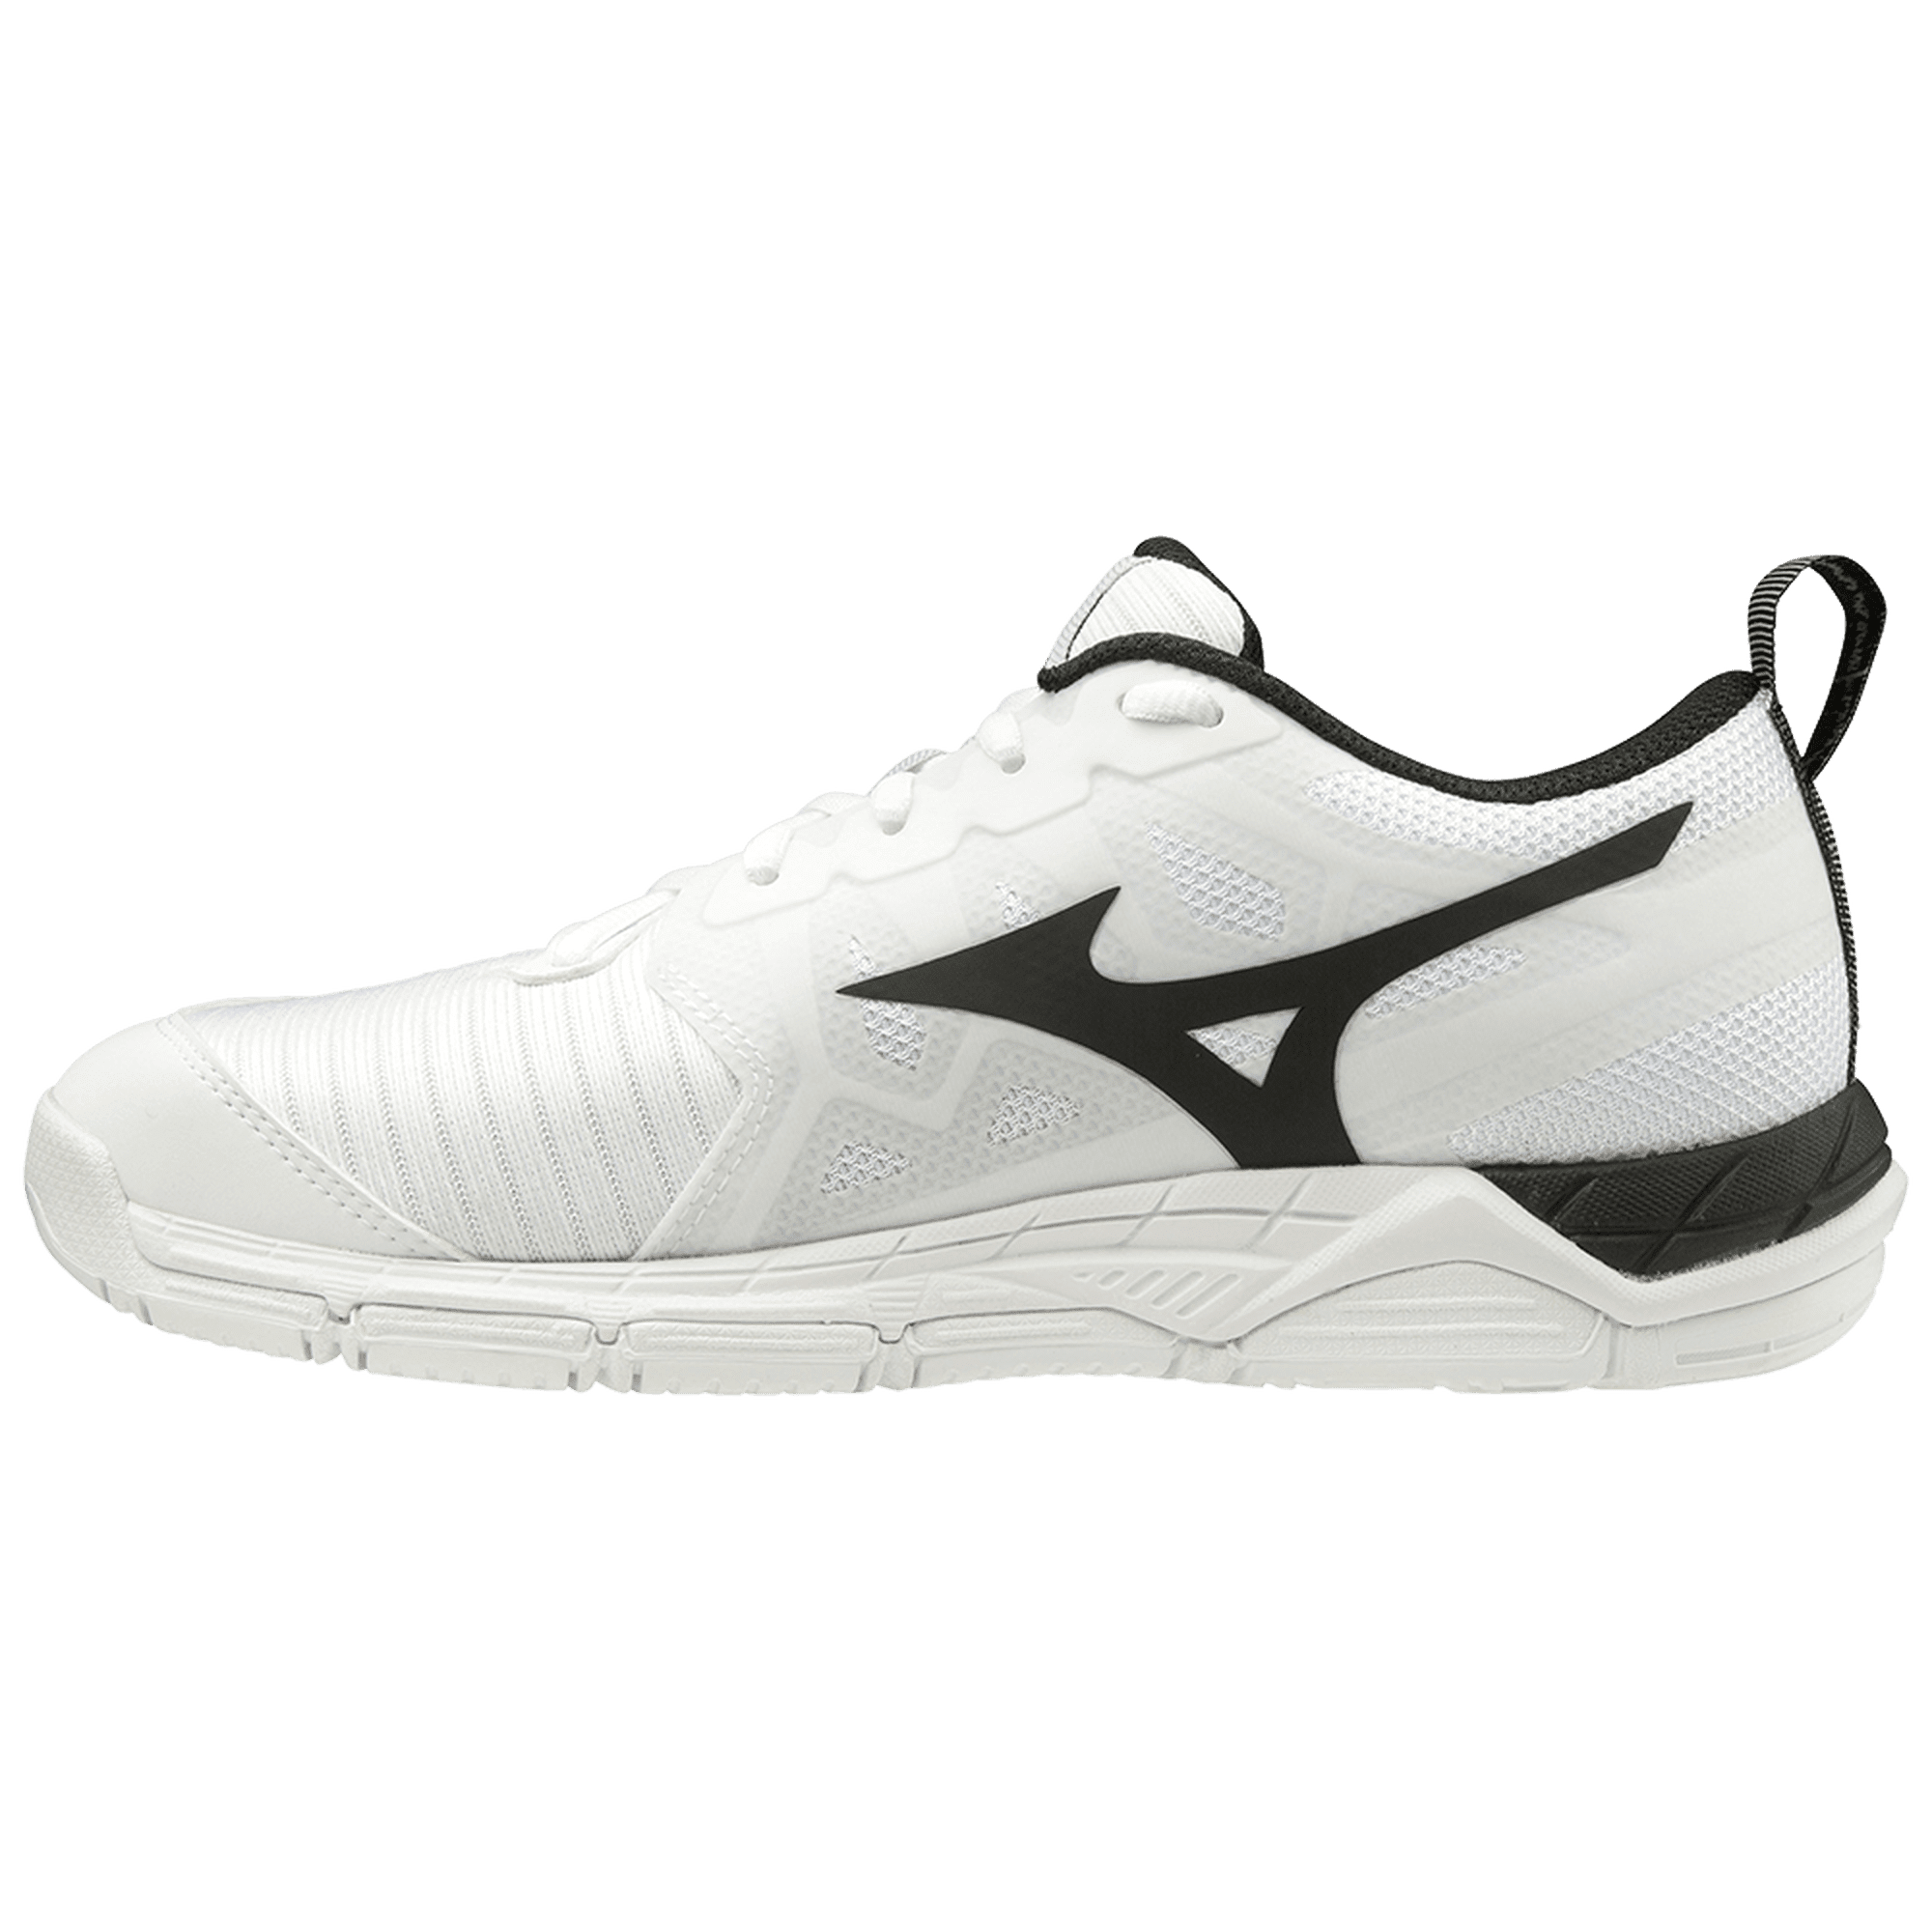 Volleyball Shoe, White-Black, Size 7.5 